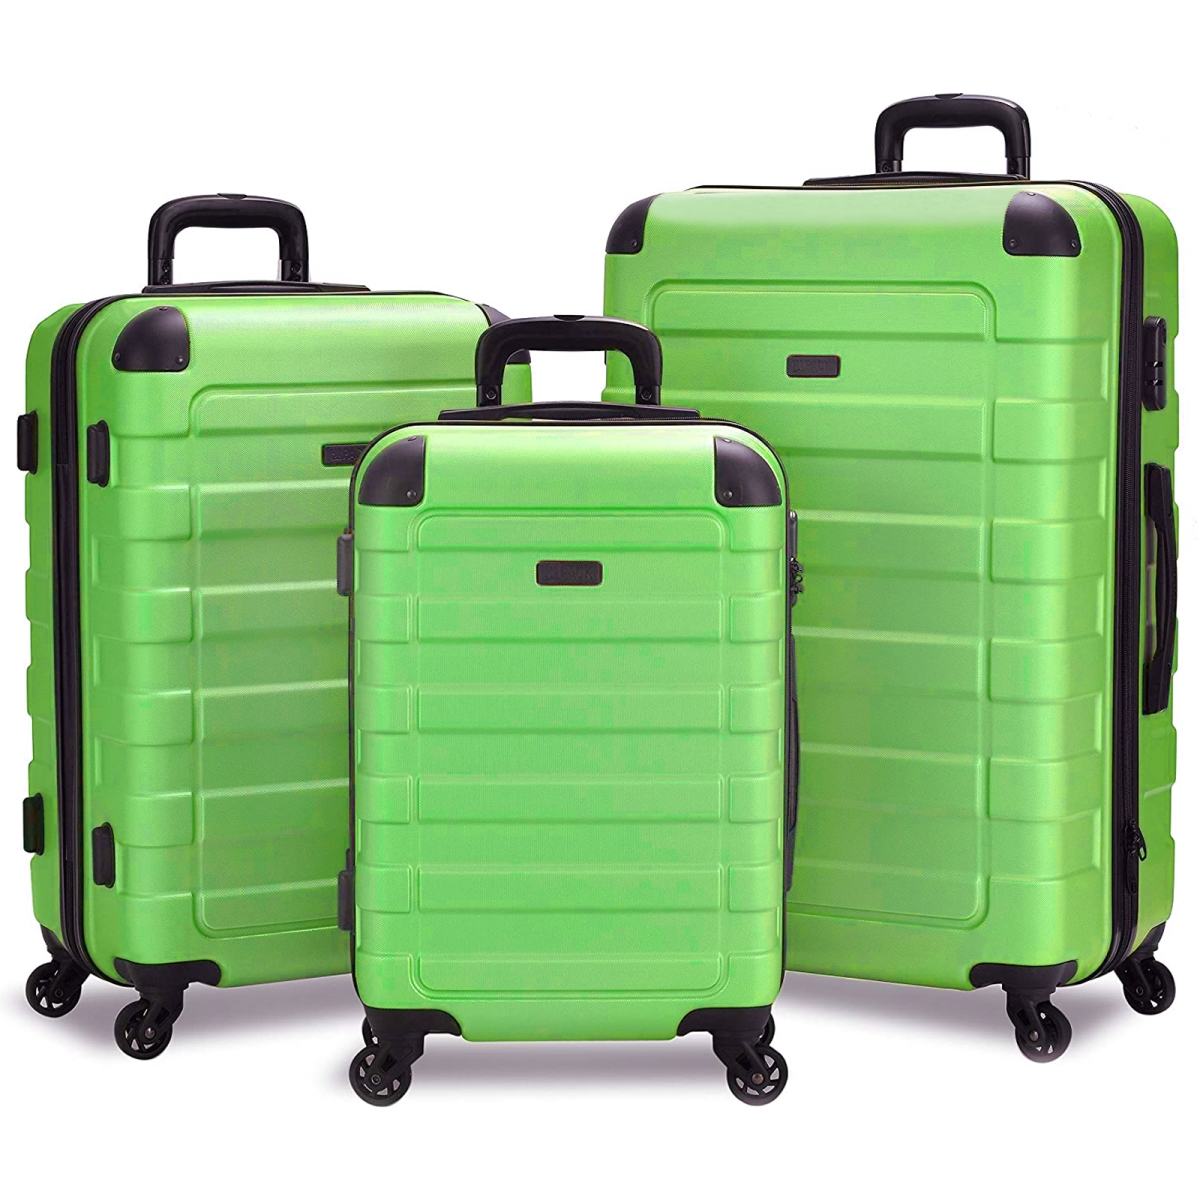 Picture of Hipack 25HP1903-GREEN Hipack Prime Hardside 3-Piece Spinner Luggage Set - Green